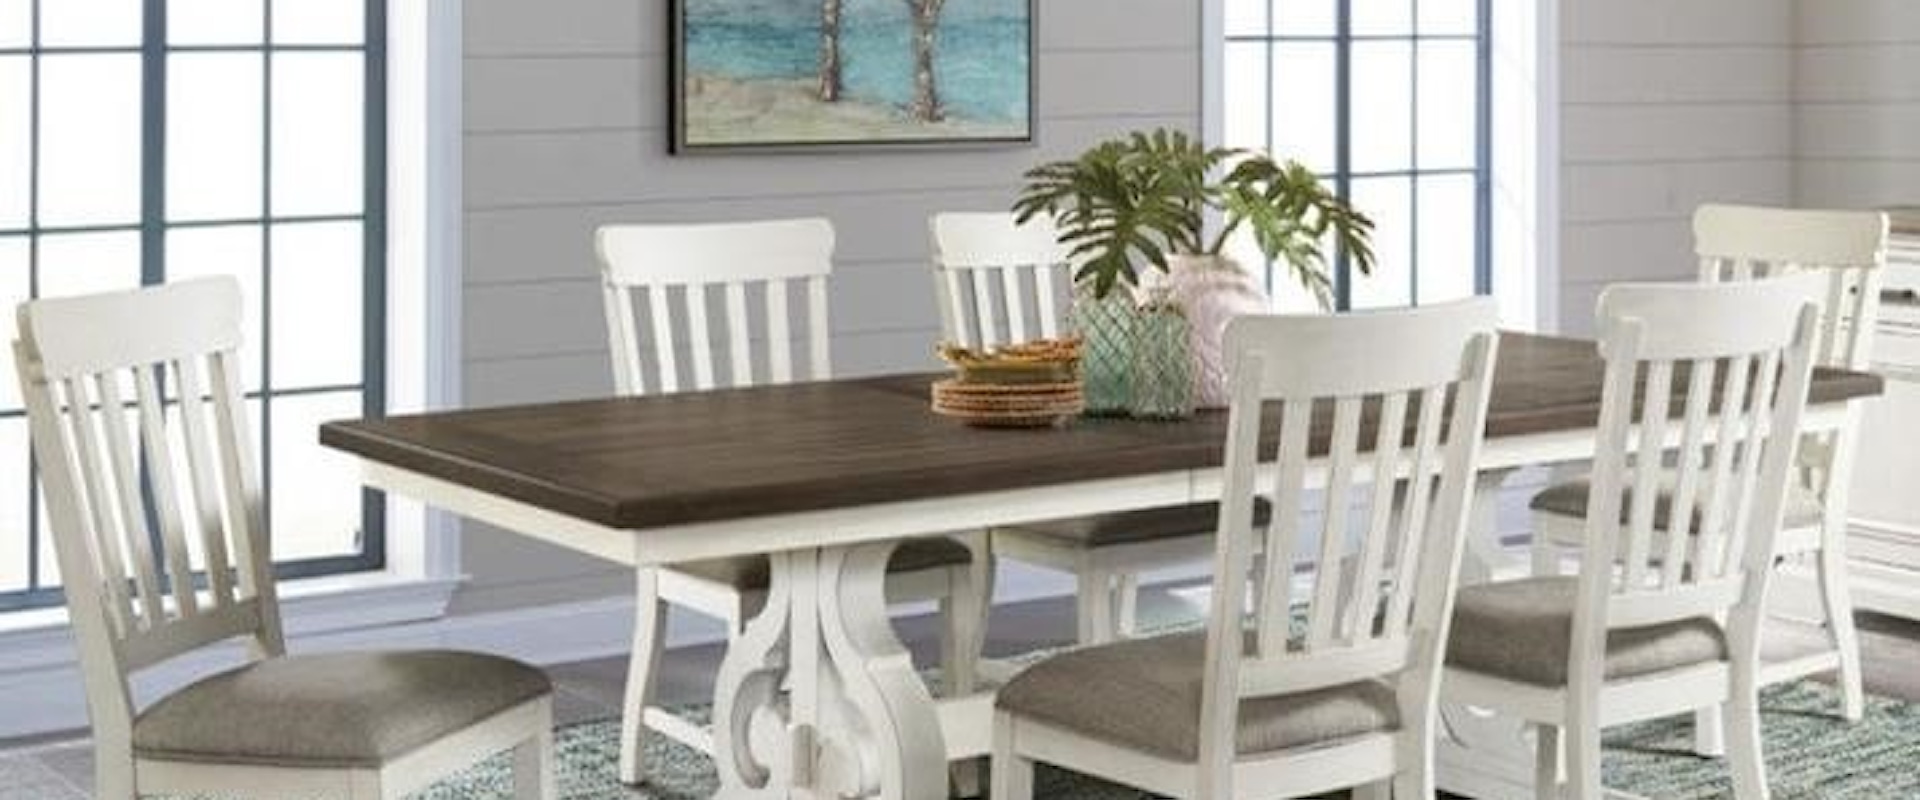 Cottage 7-Piece Table and Chair Set with Storing Leaf